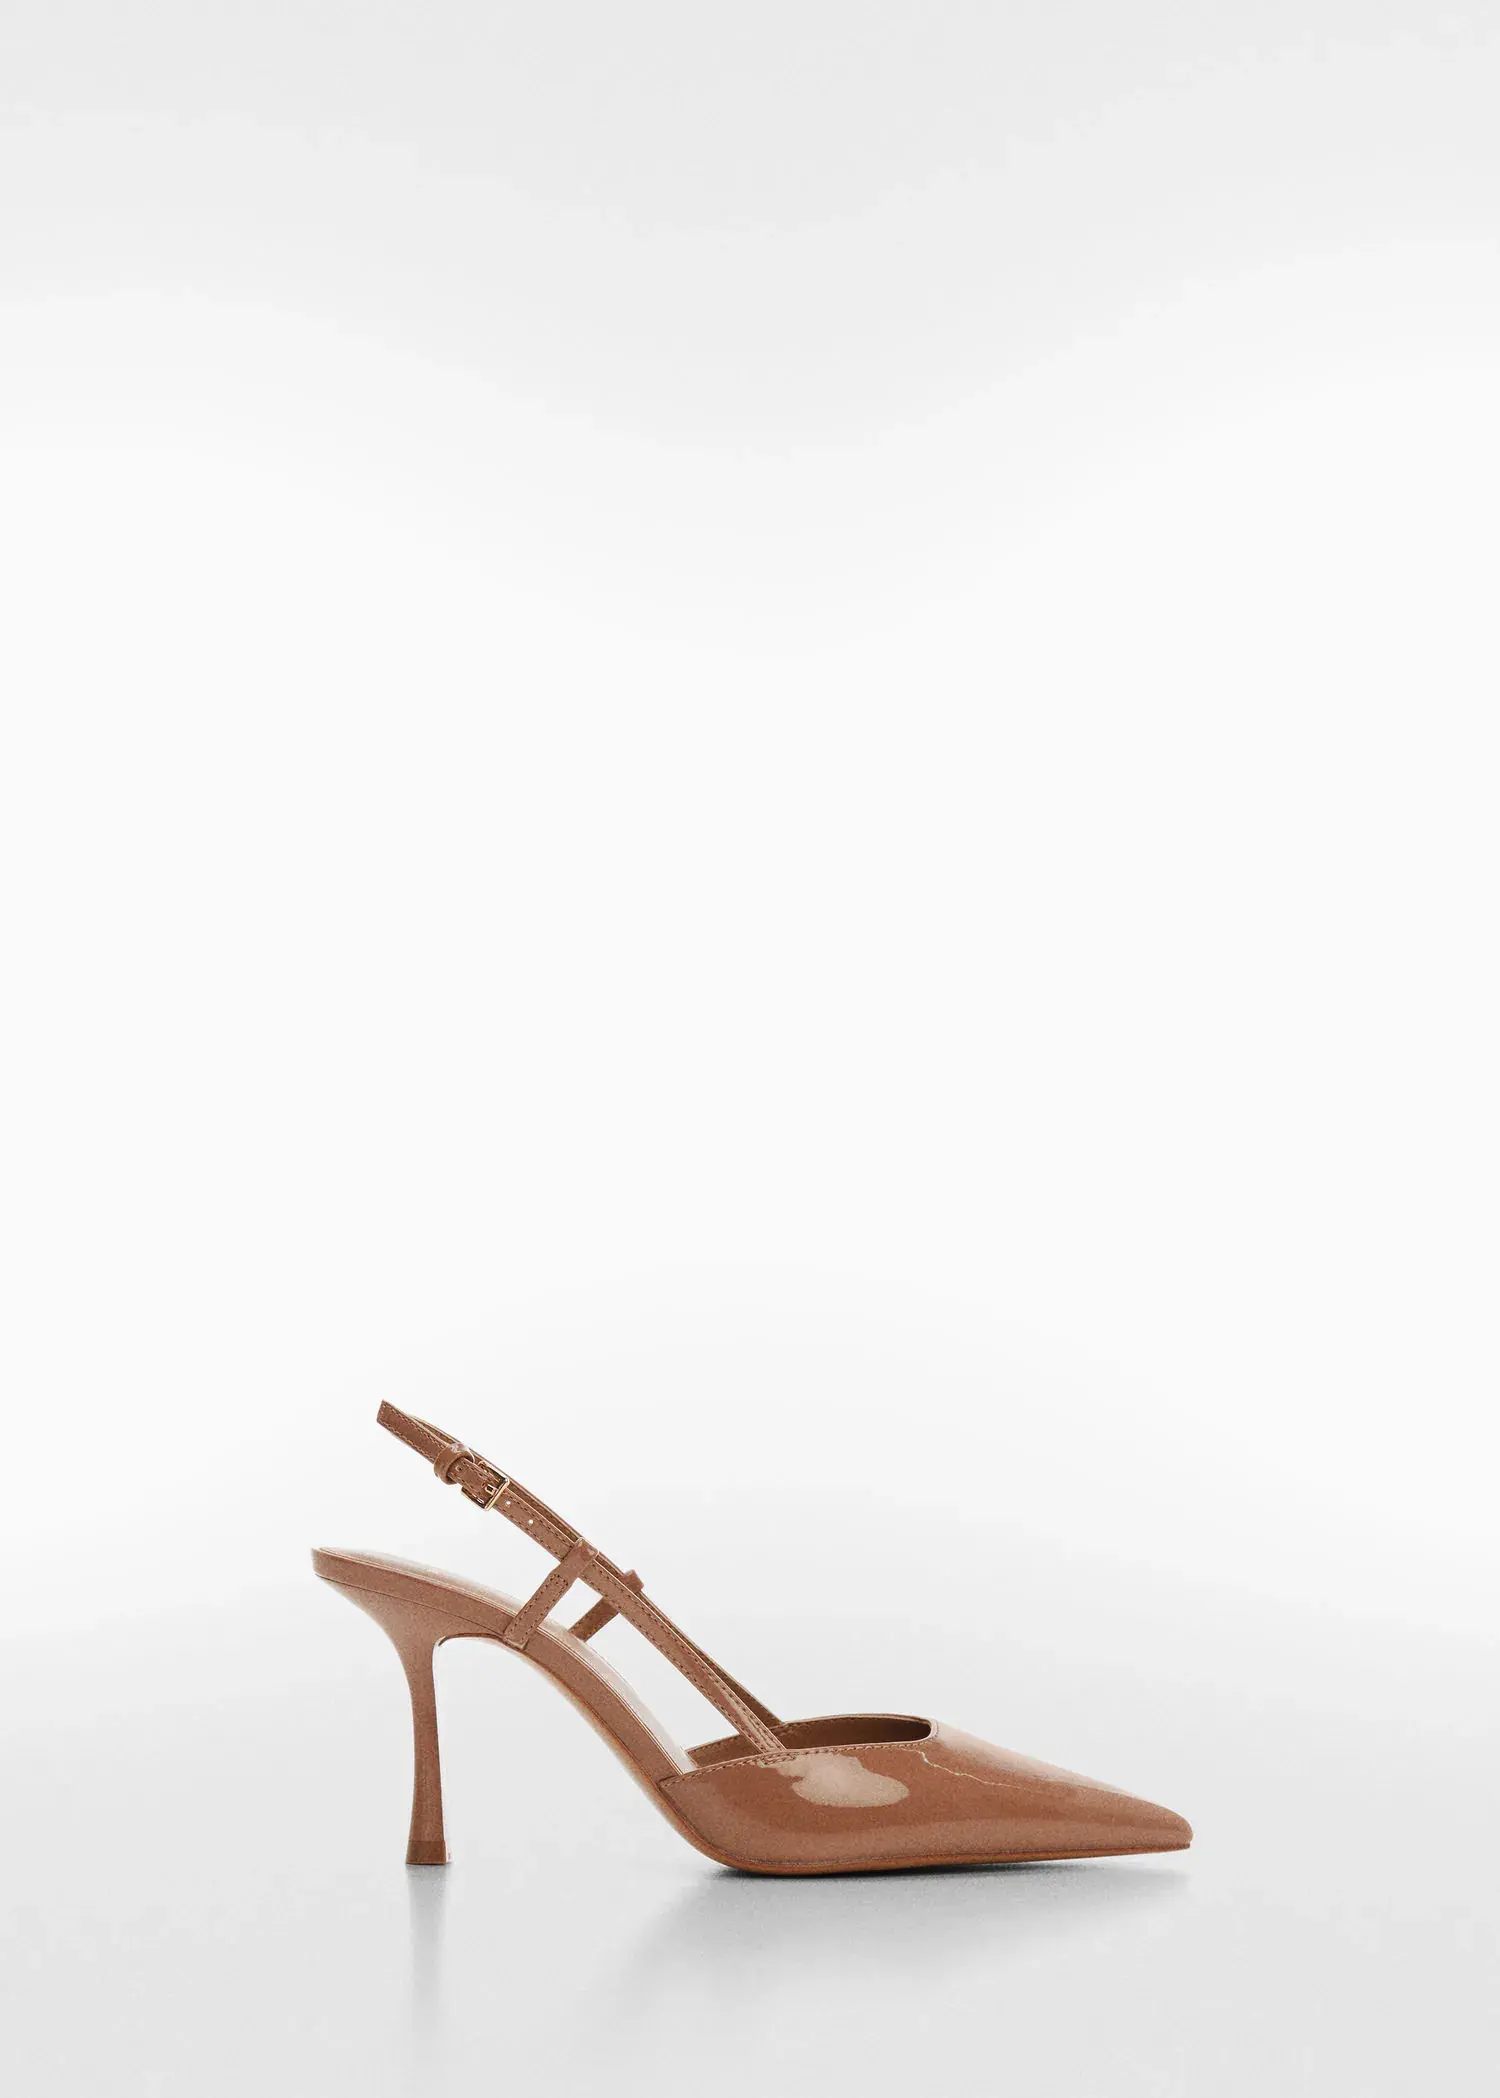 Mango Pointed-toe heeled shoes . a pair of high heeled shoes on a white background. 